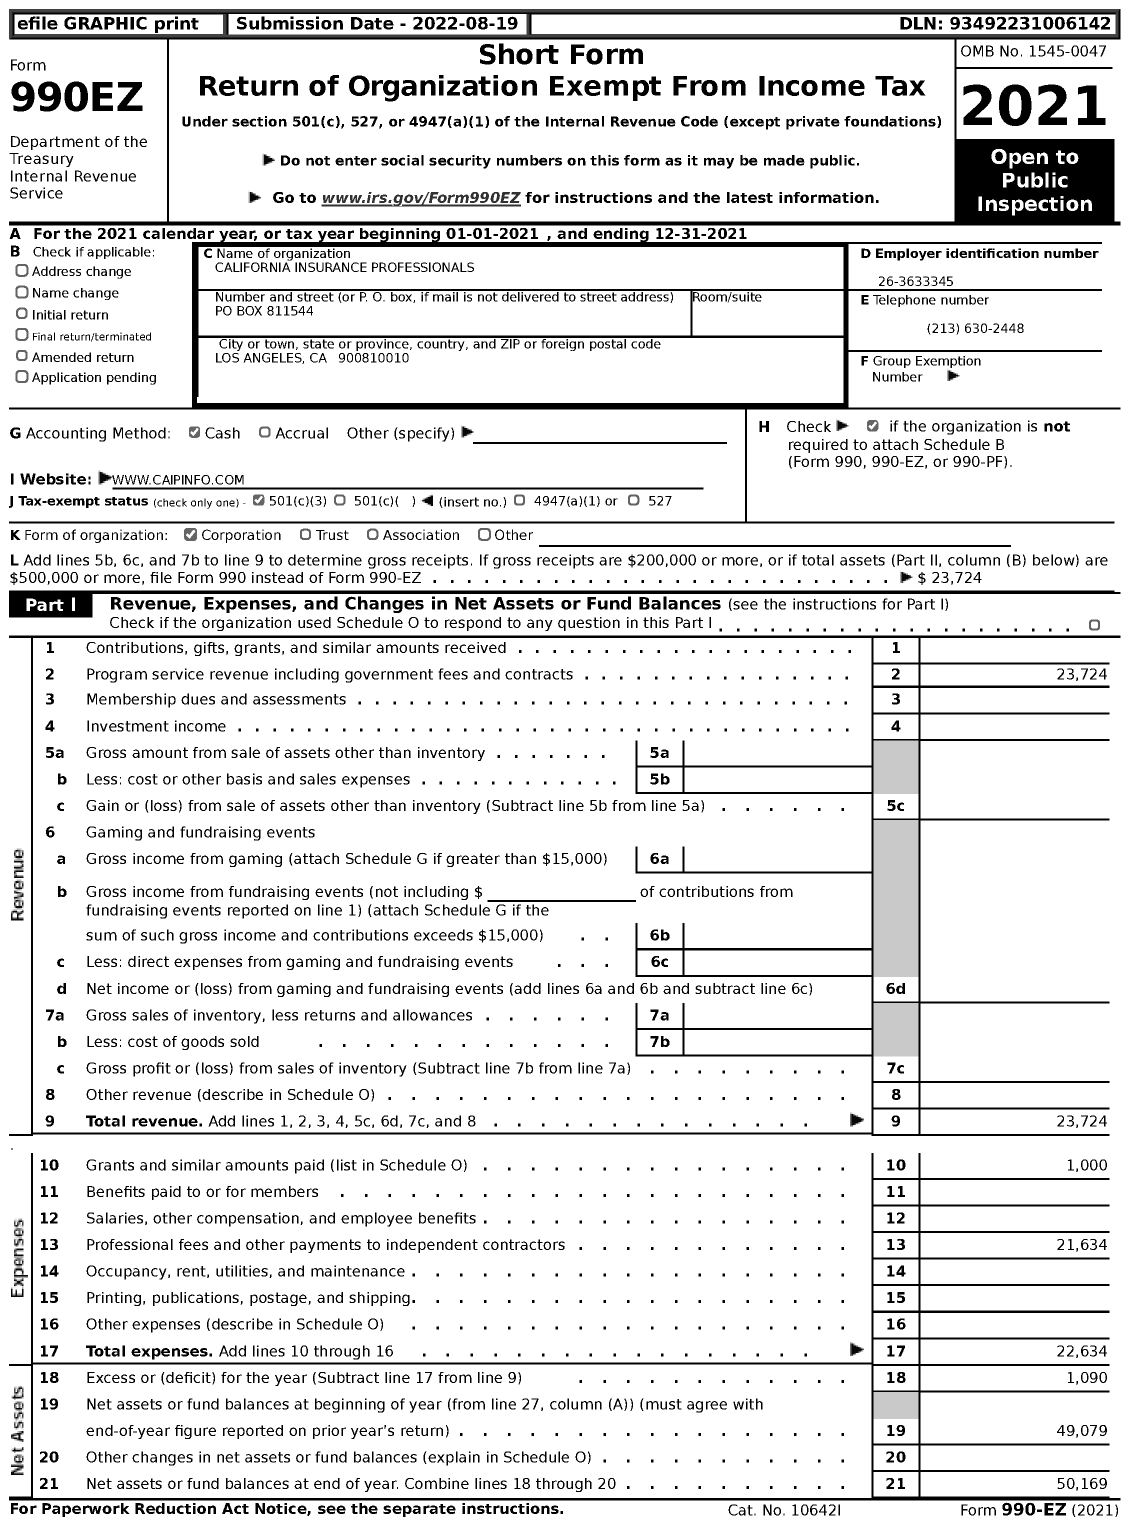 Image of first page of 2021 Form 990EZ for California Insurance Professionals (CAIP)